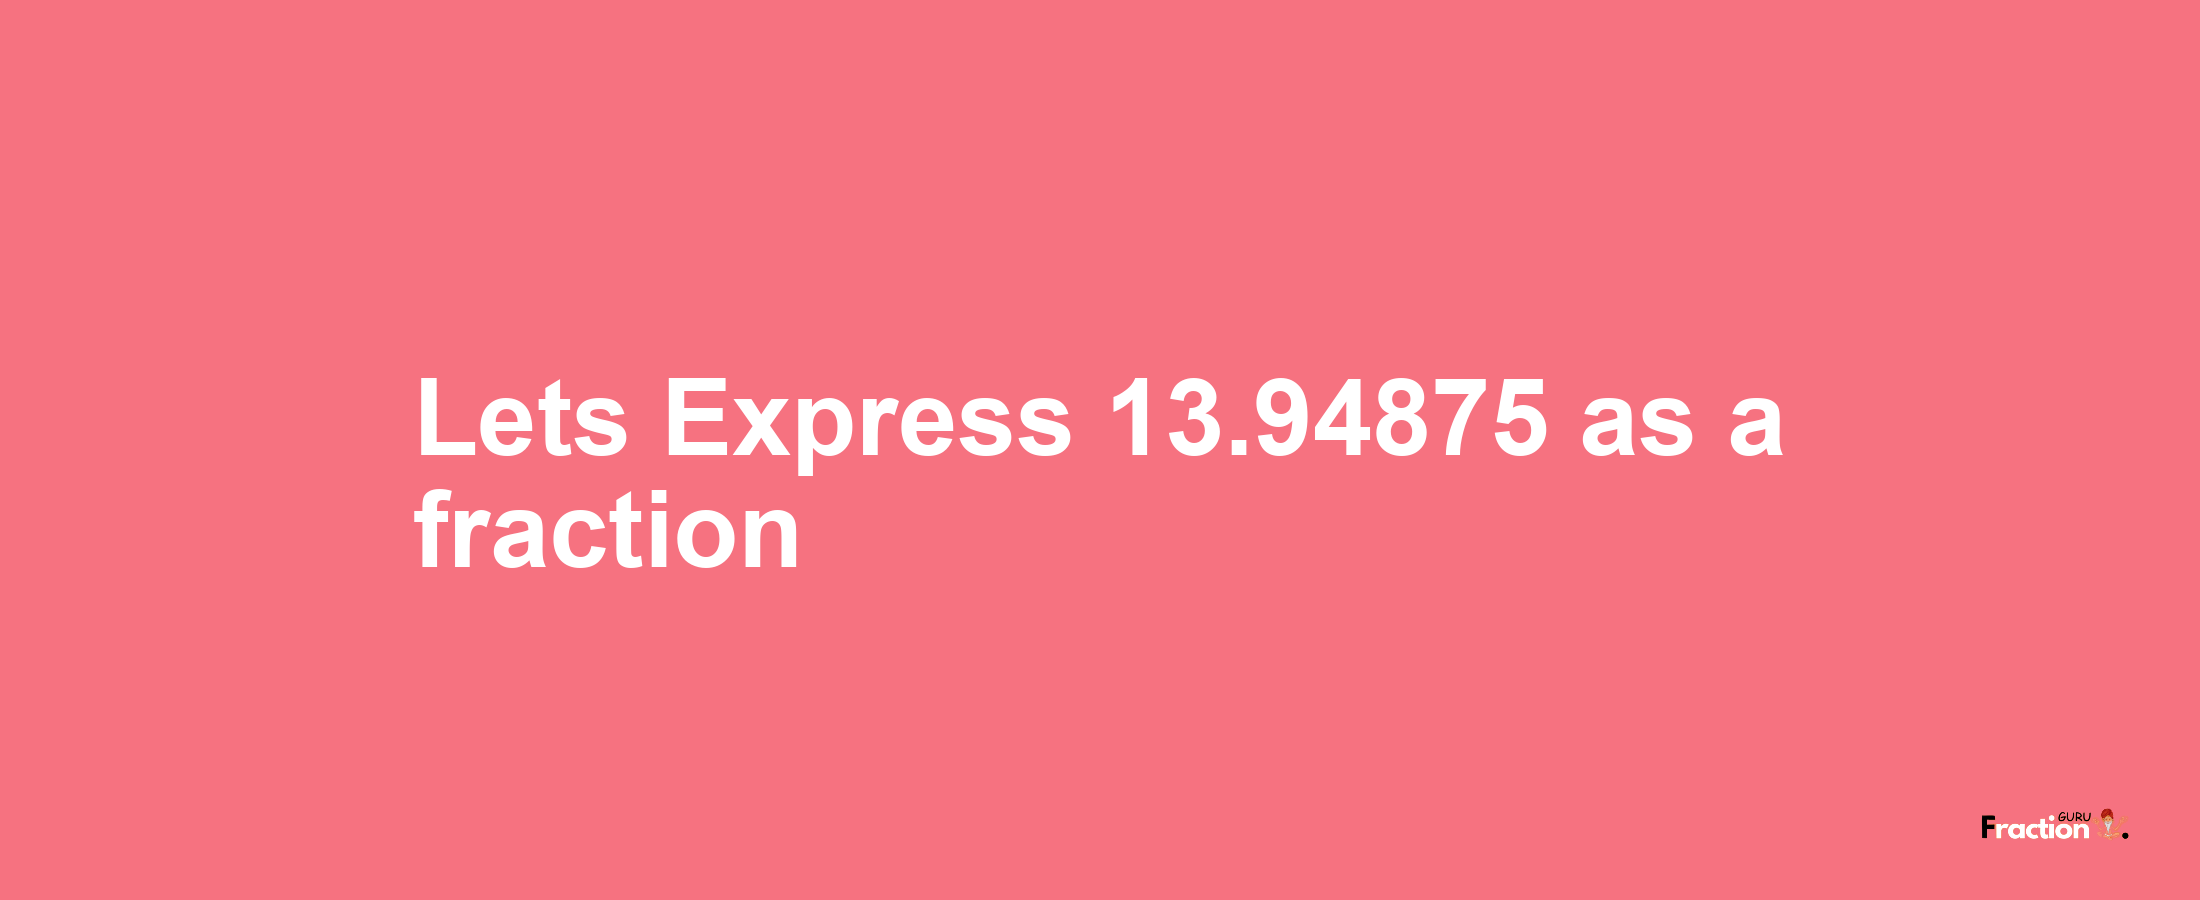 Lets Express 13.94875 as afraction